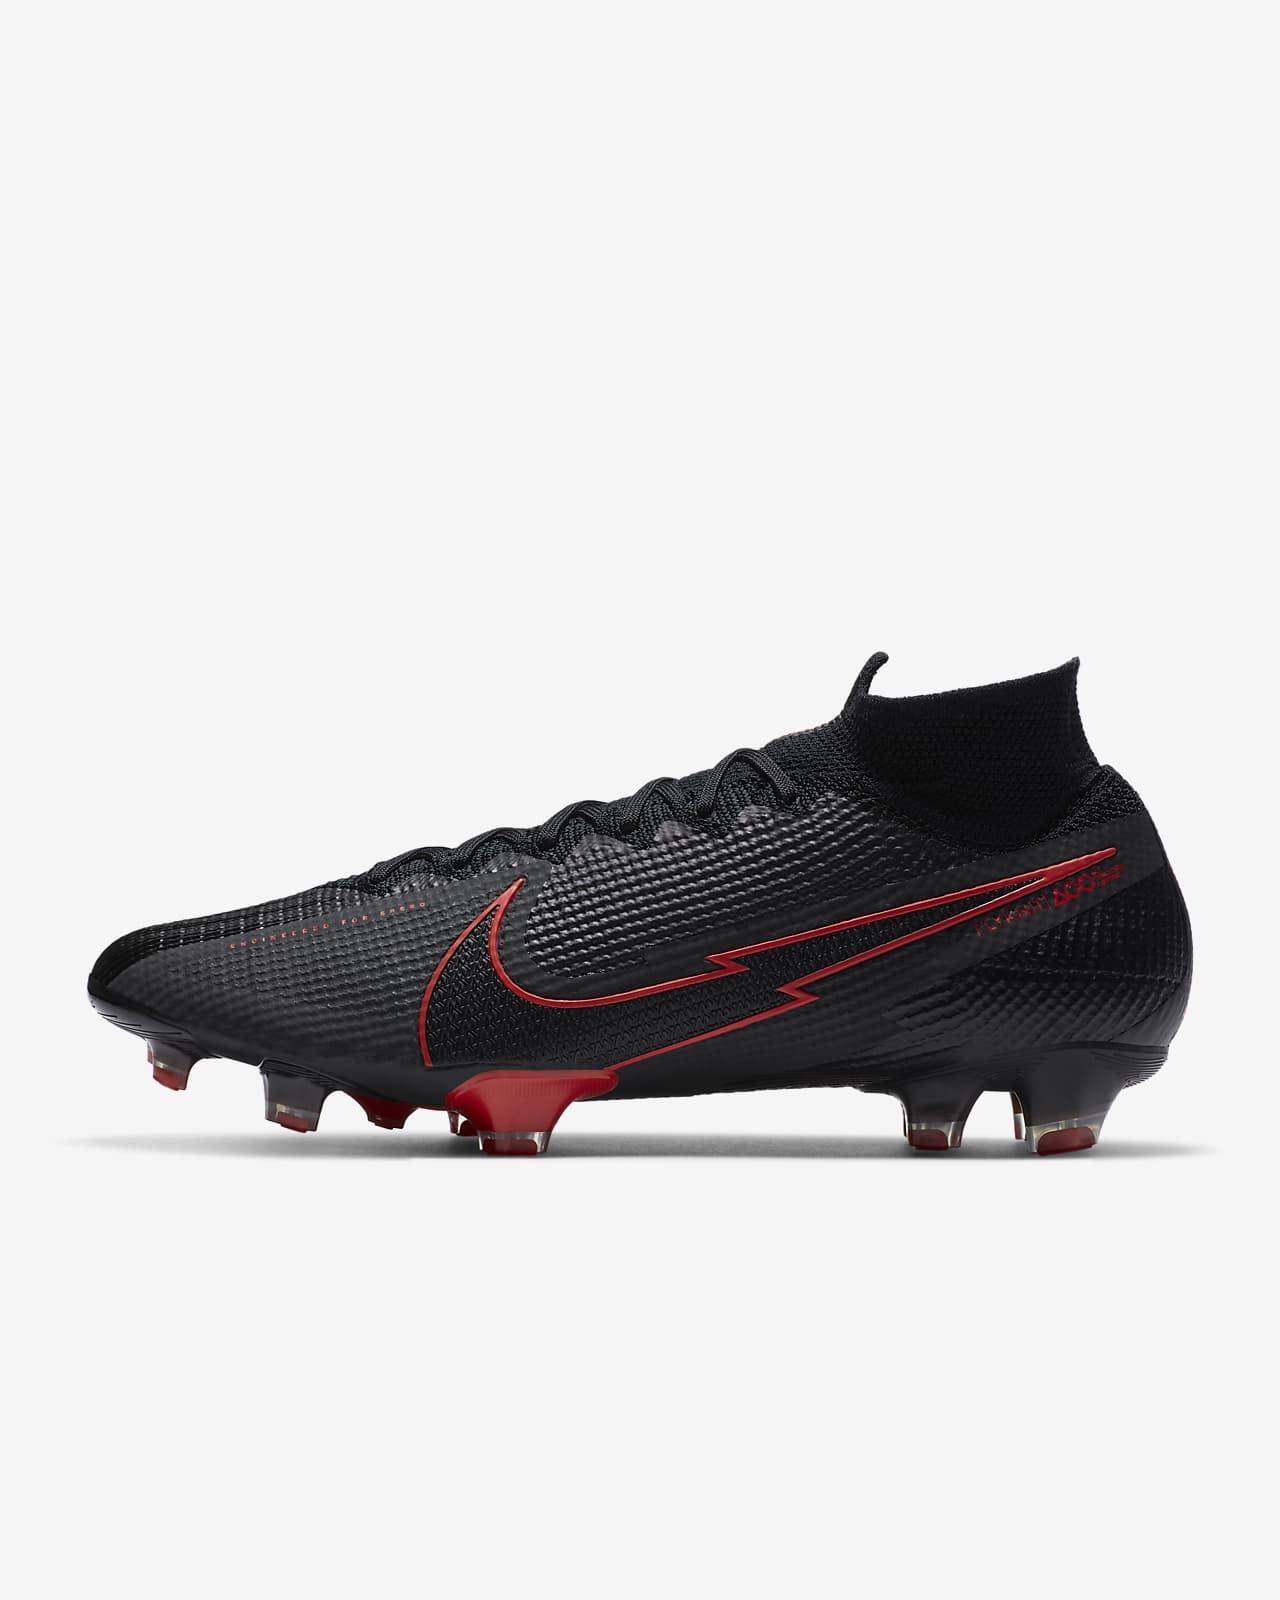 nike football boots without studs